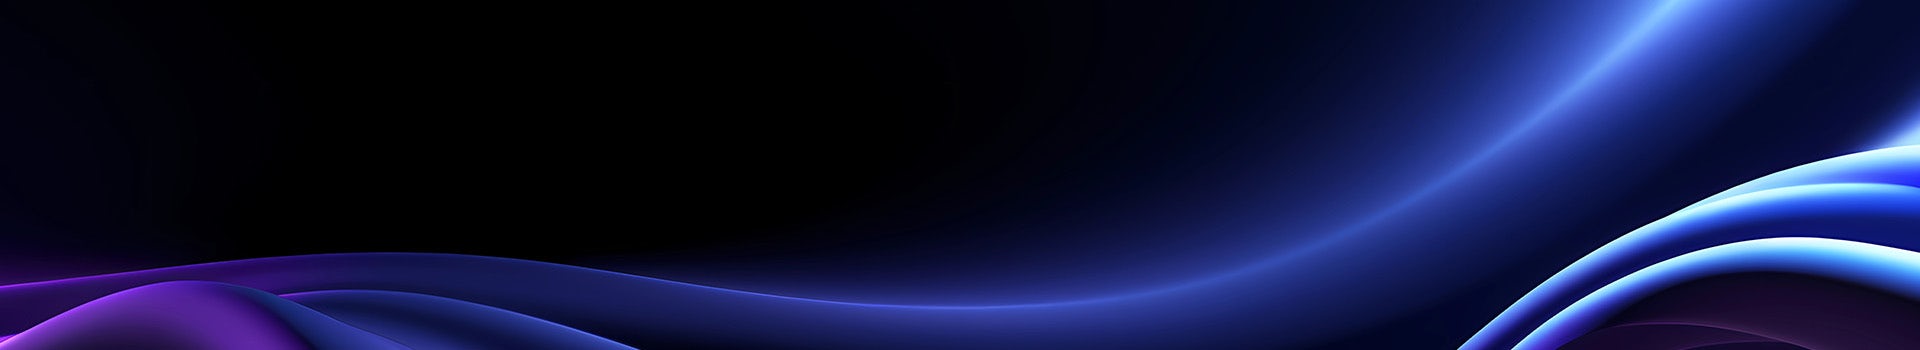 A blue and purple abstract background.